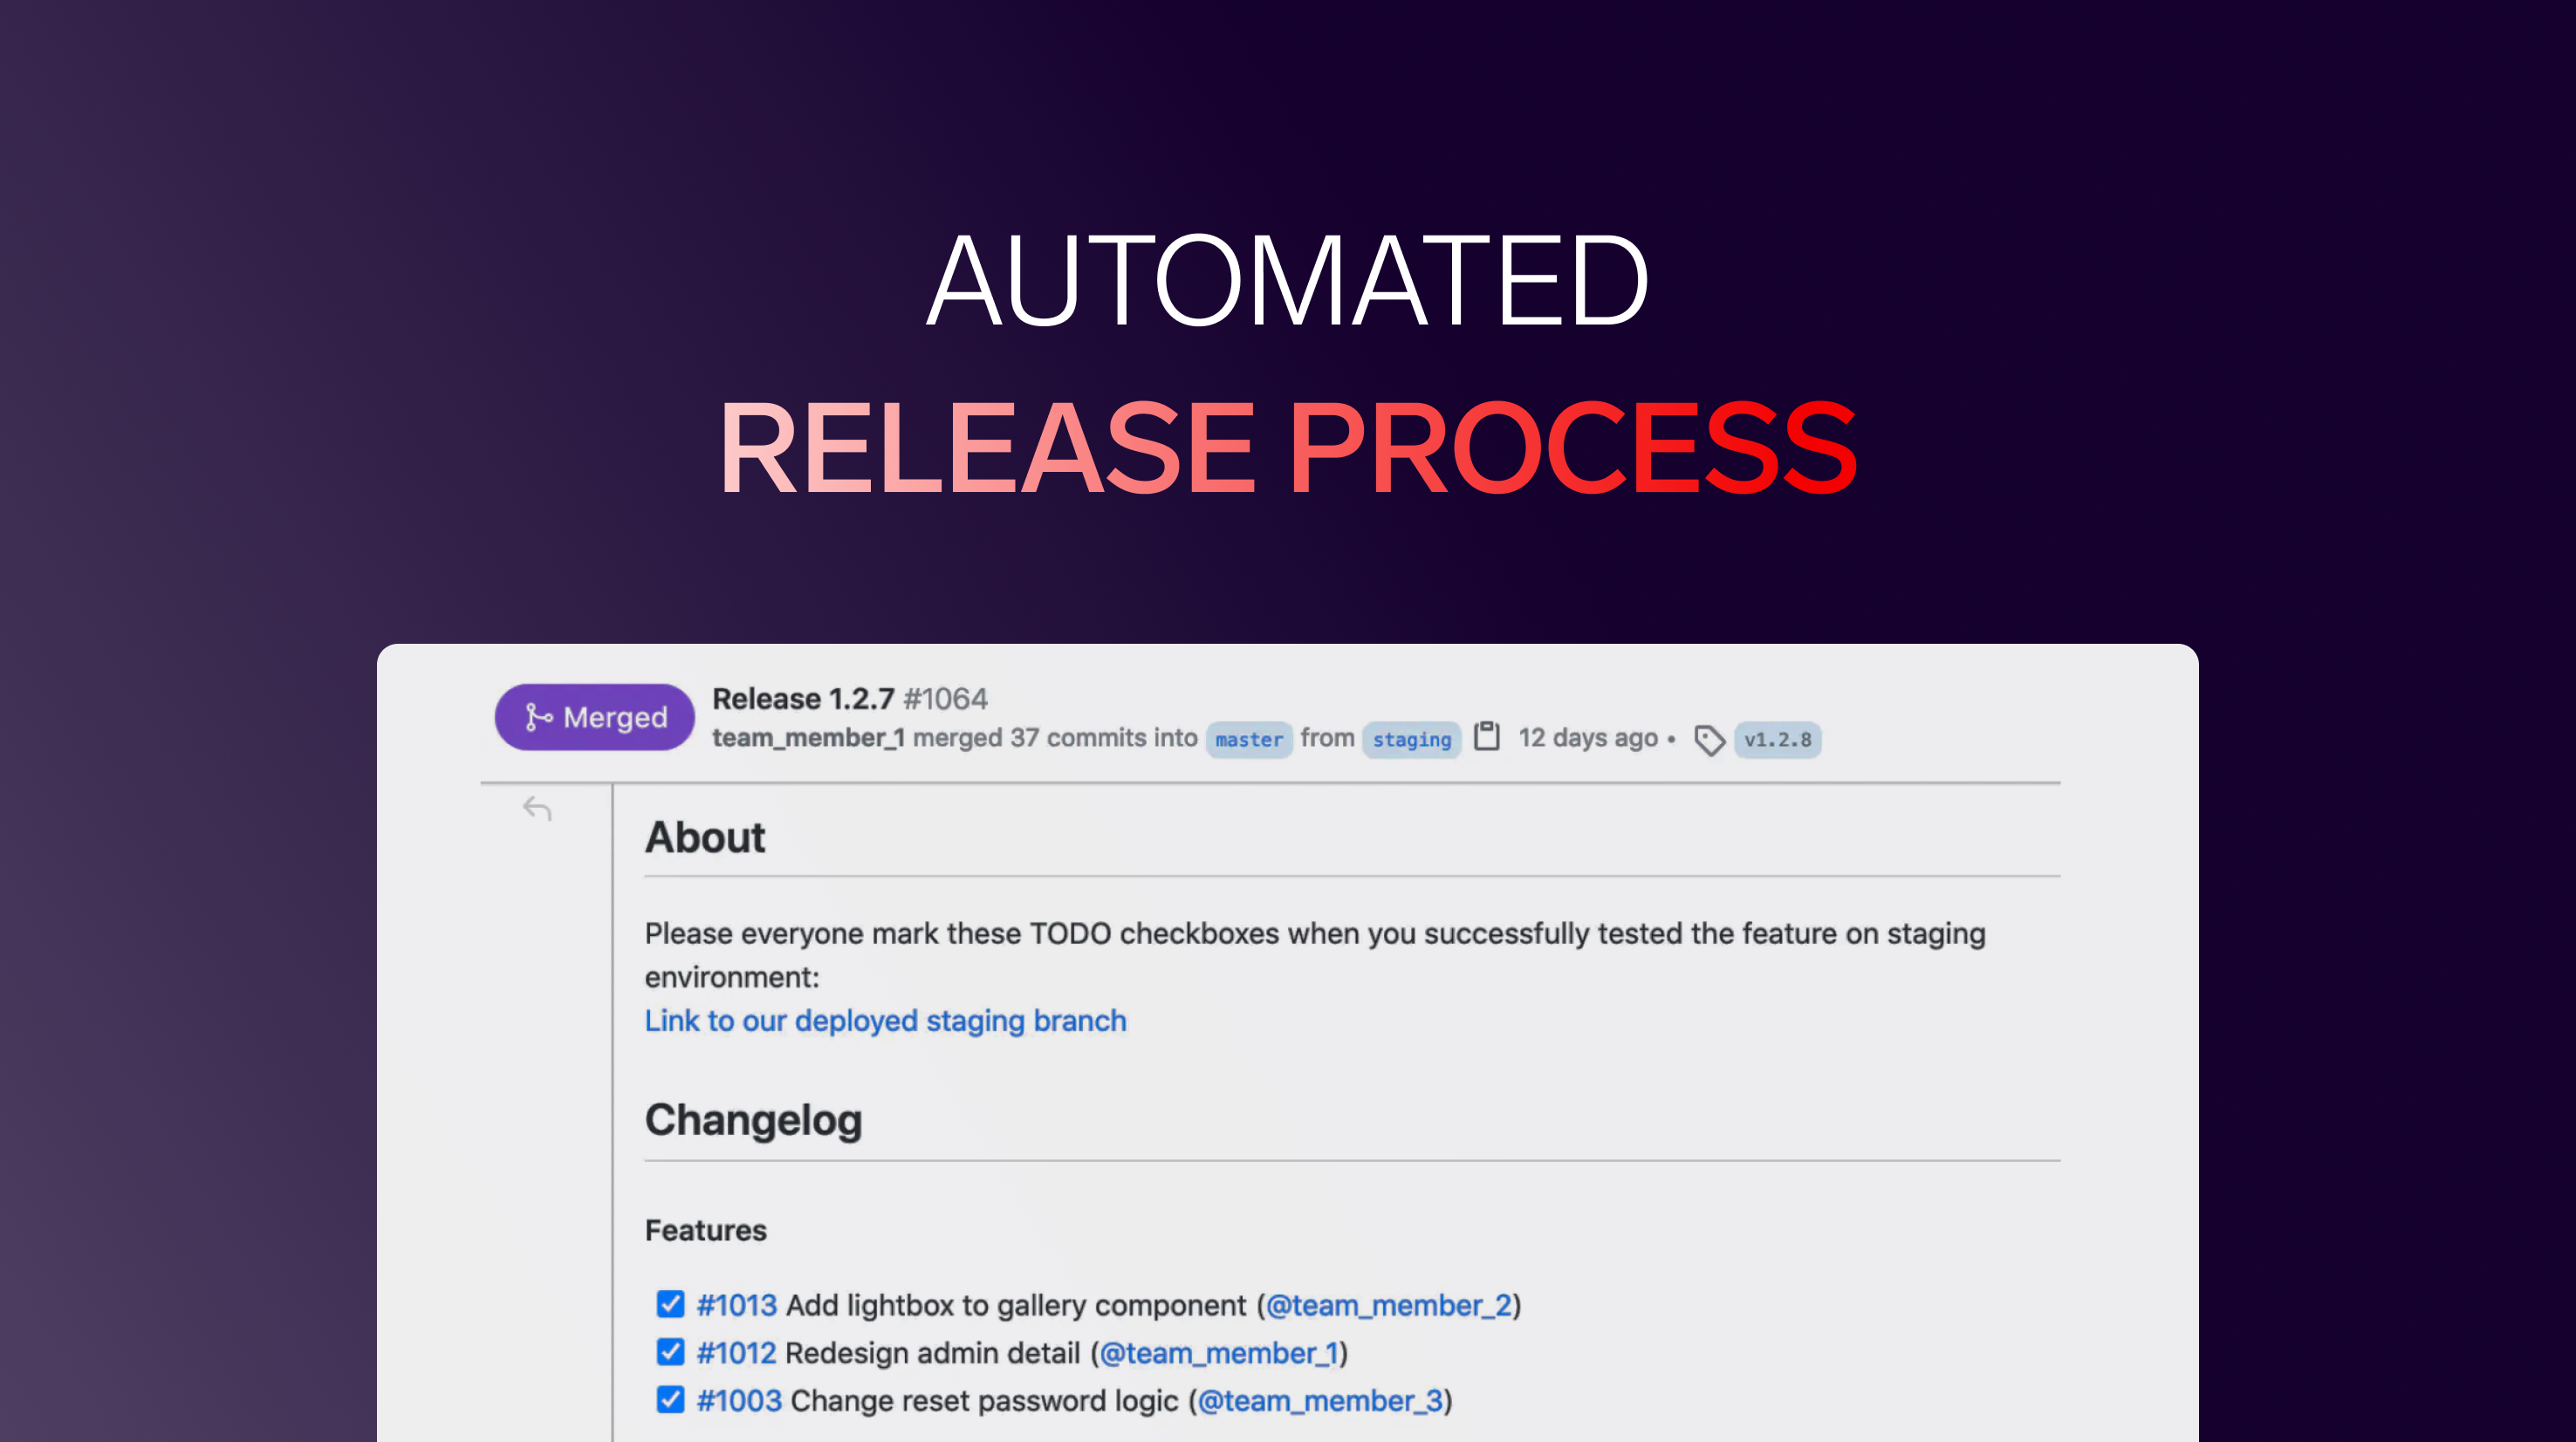 How we automatized our release process into just 3 clicks